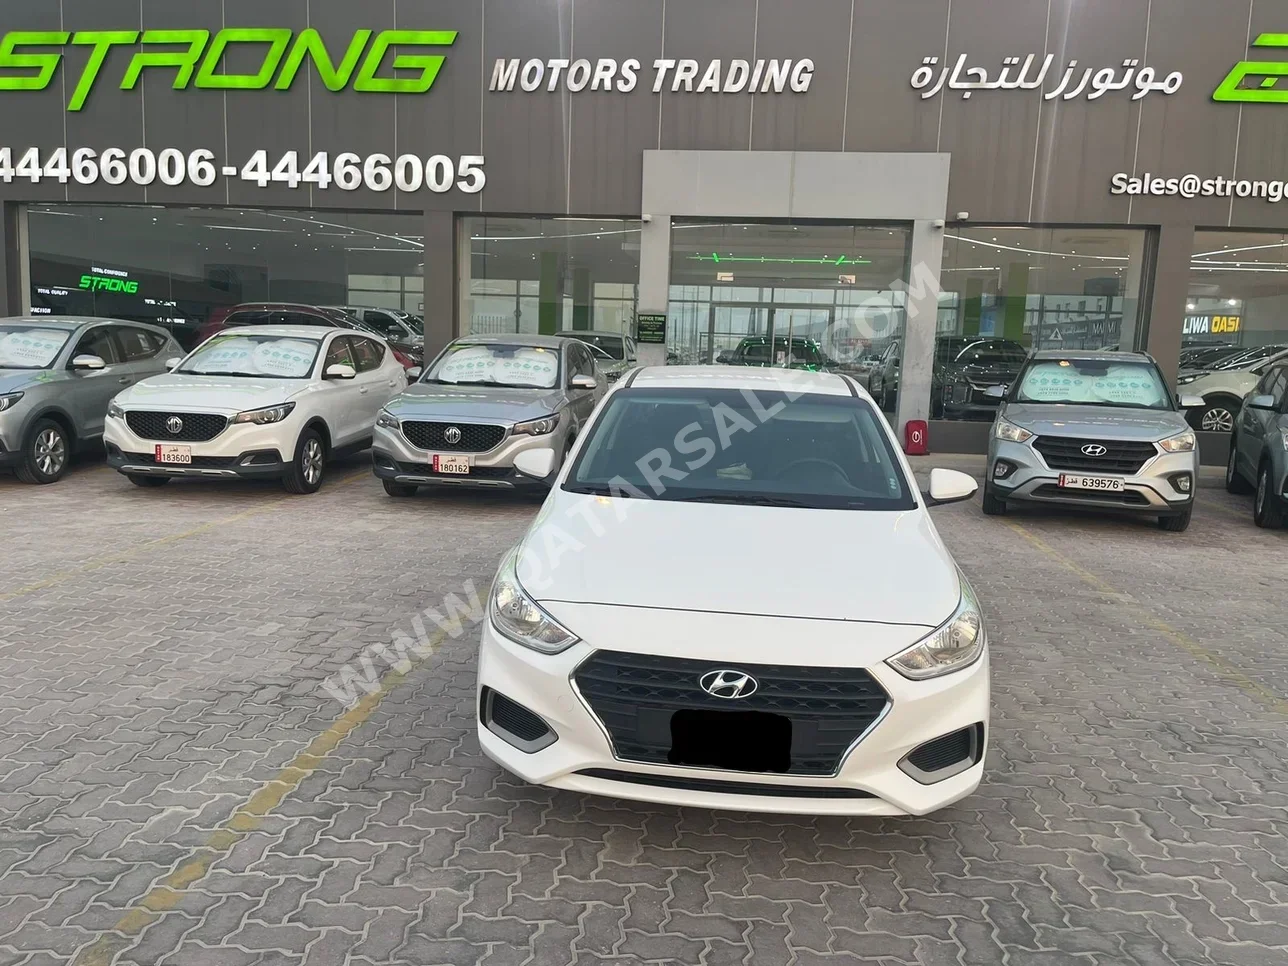 Hyundai  Accent  2020  Automatic  53,000 Km  4 Cylinder  Front Wheel Drive (FWD)  Sedan  White